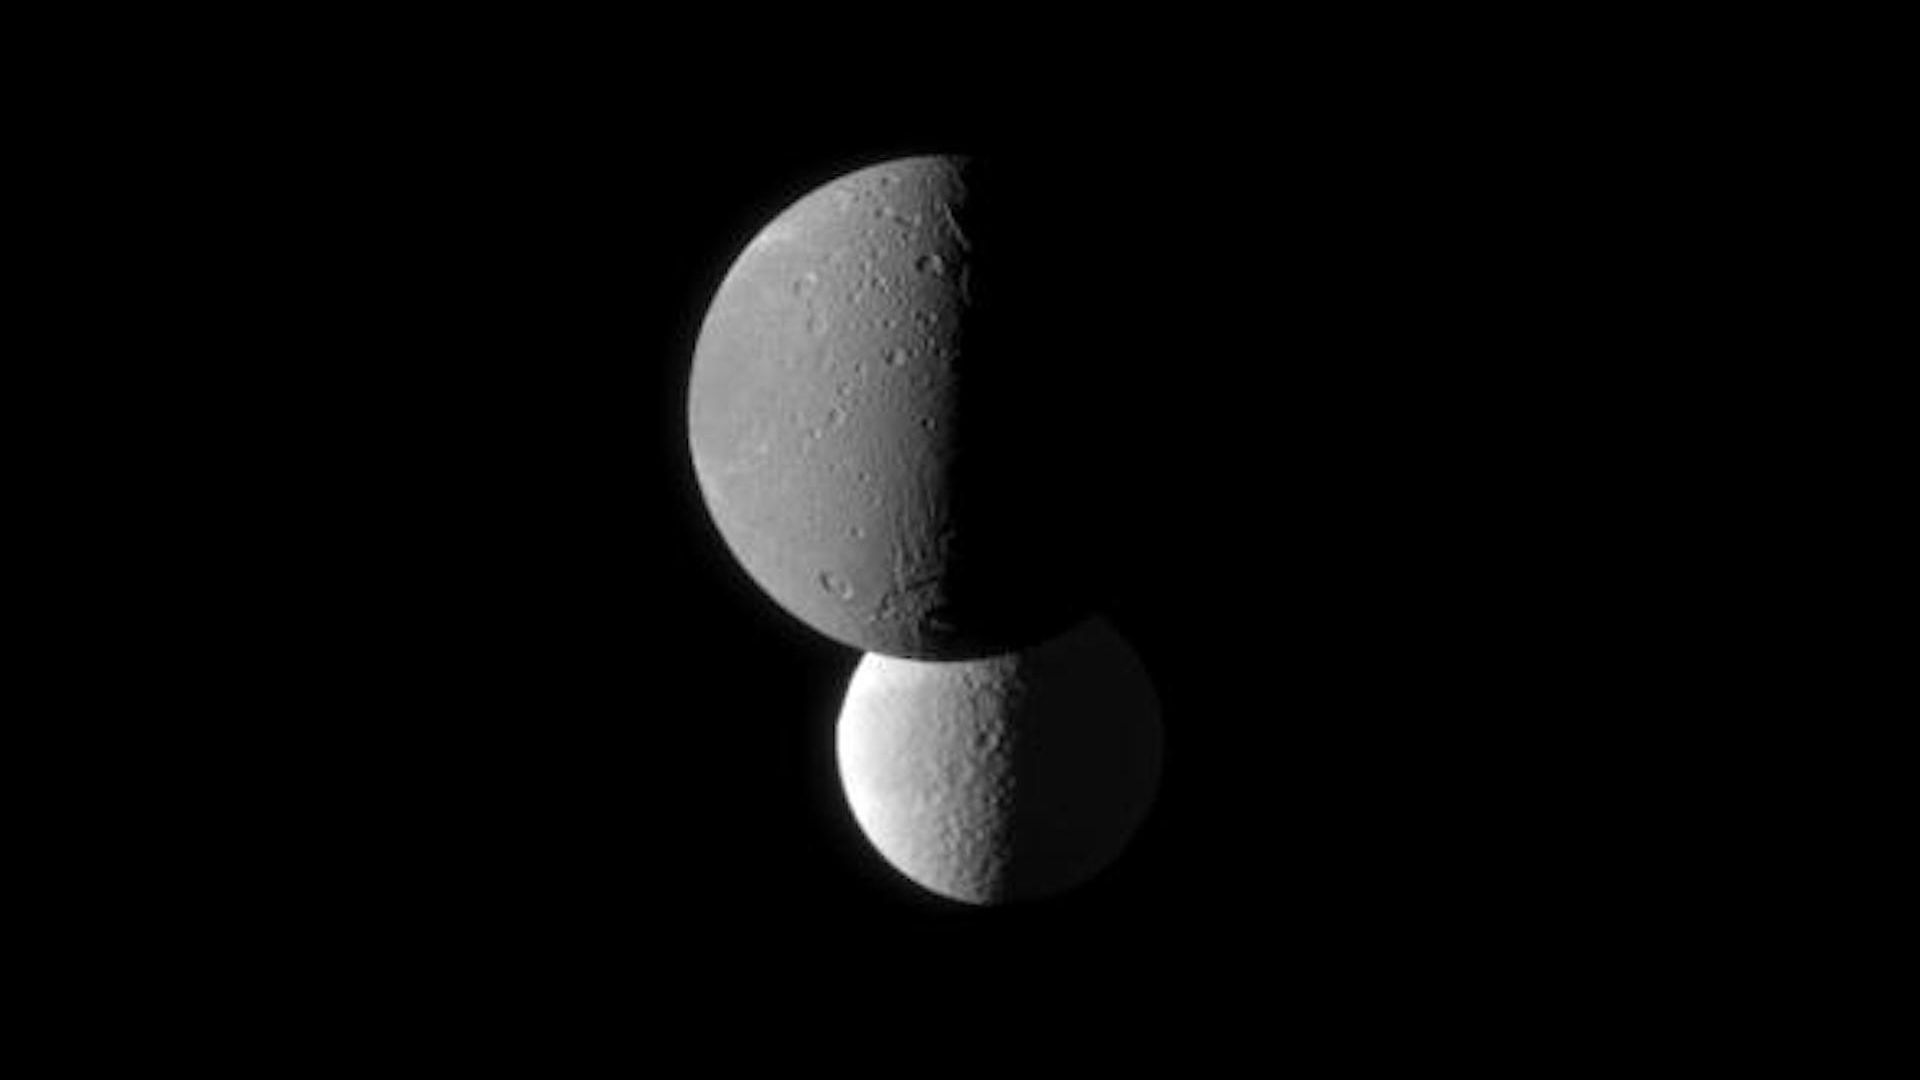 Two moons of Saturn in the blackness of space